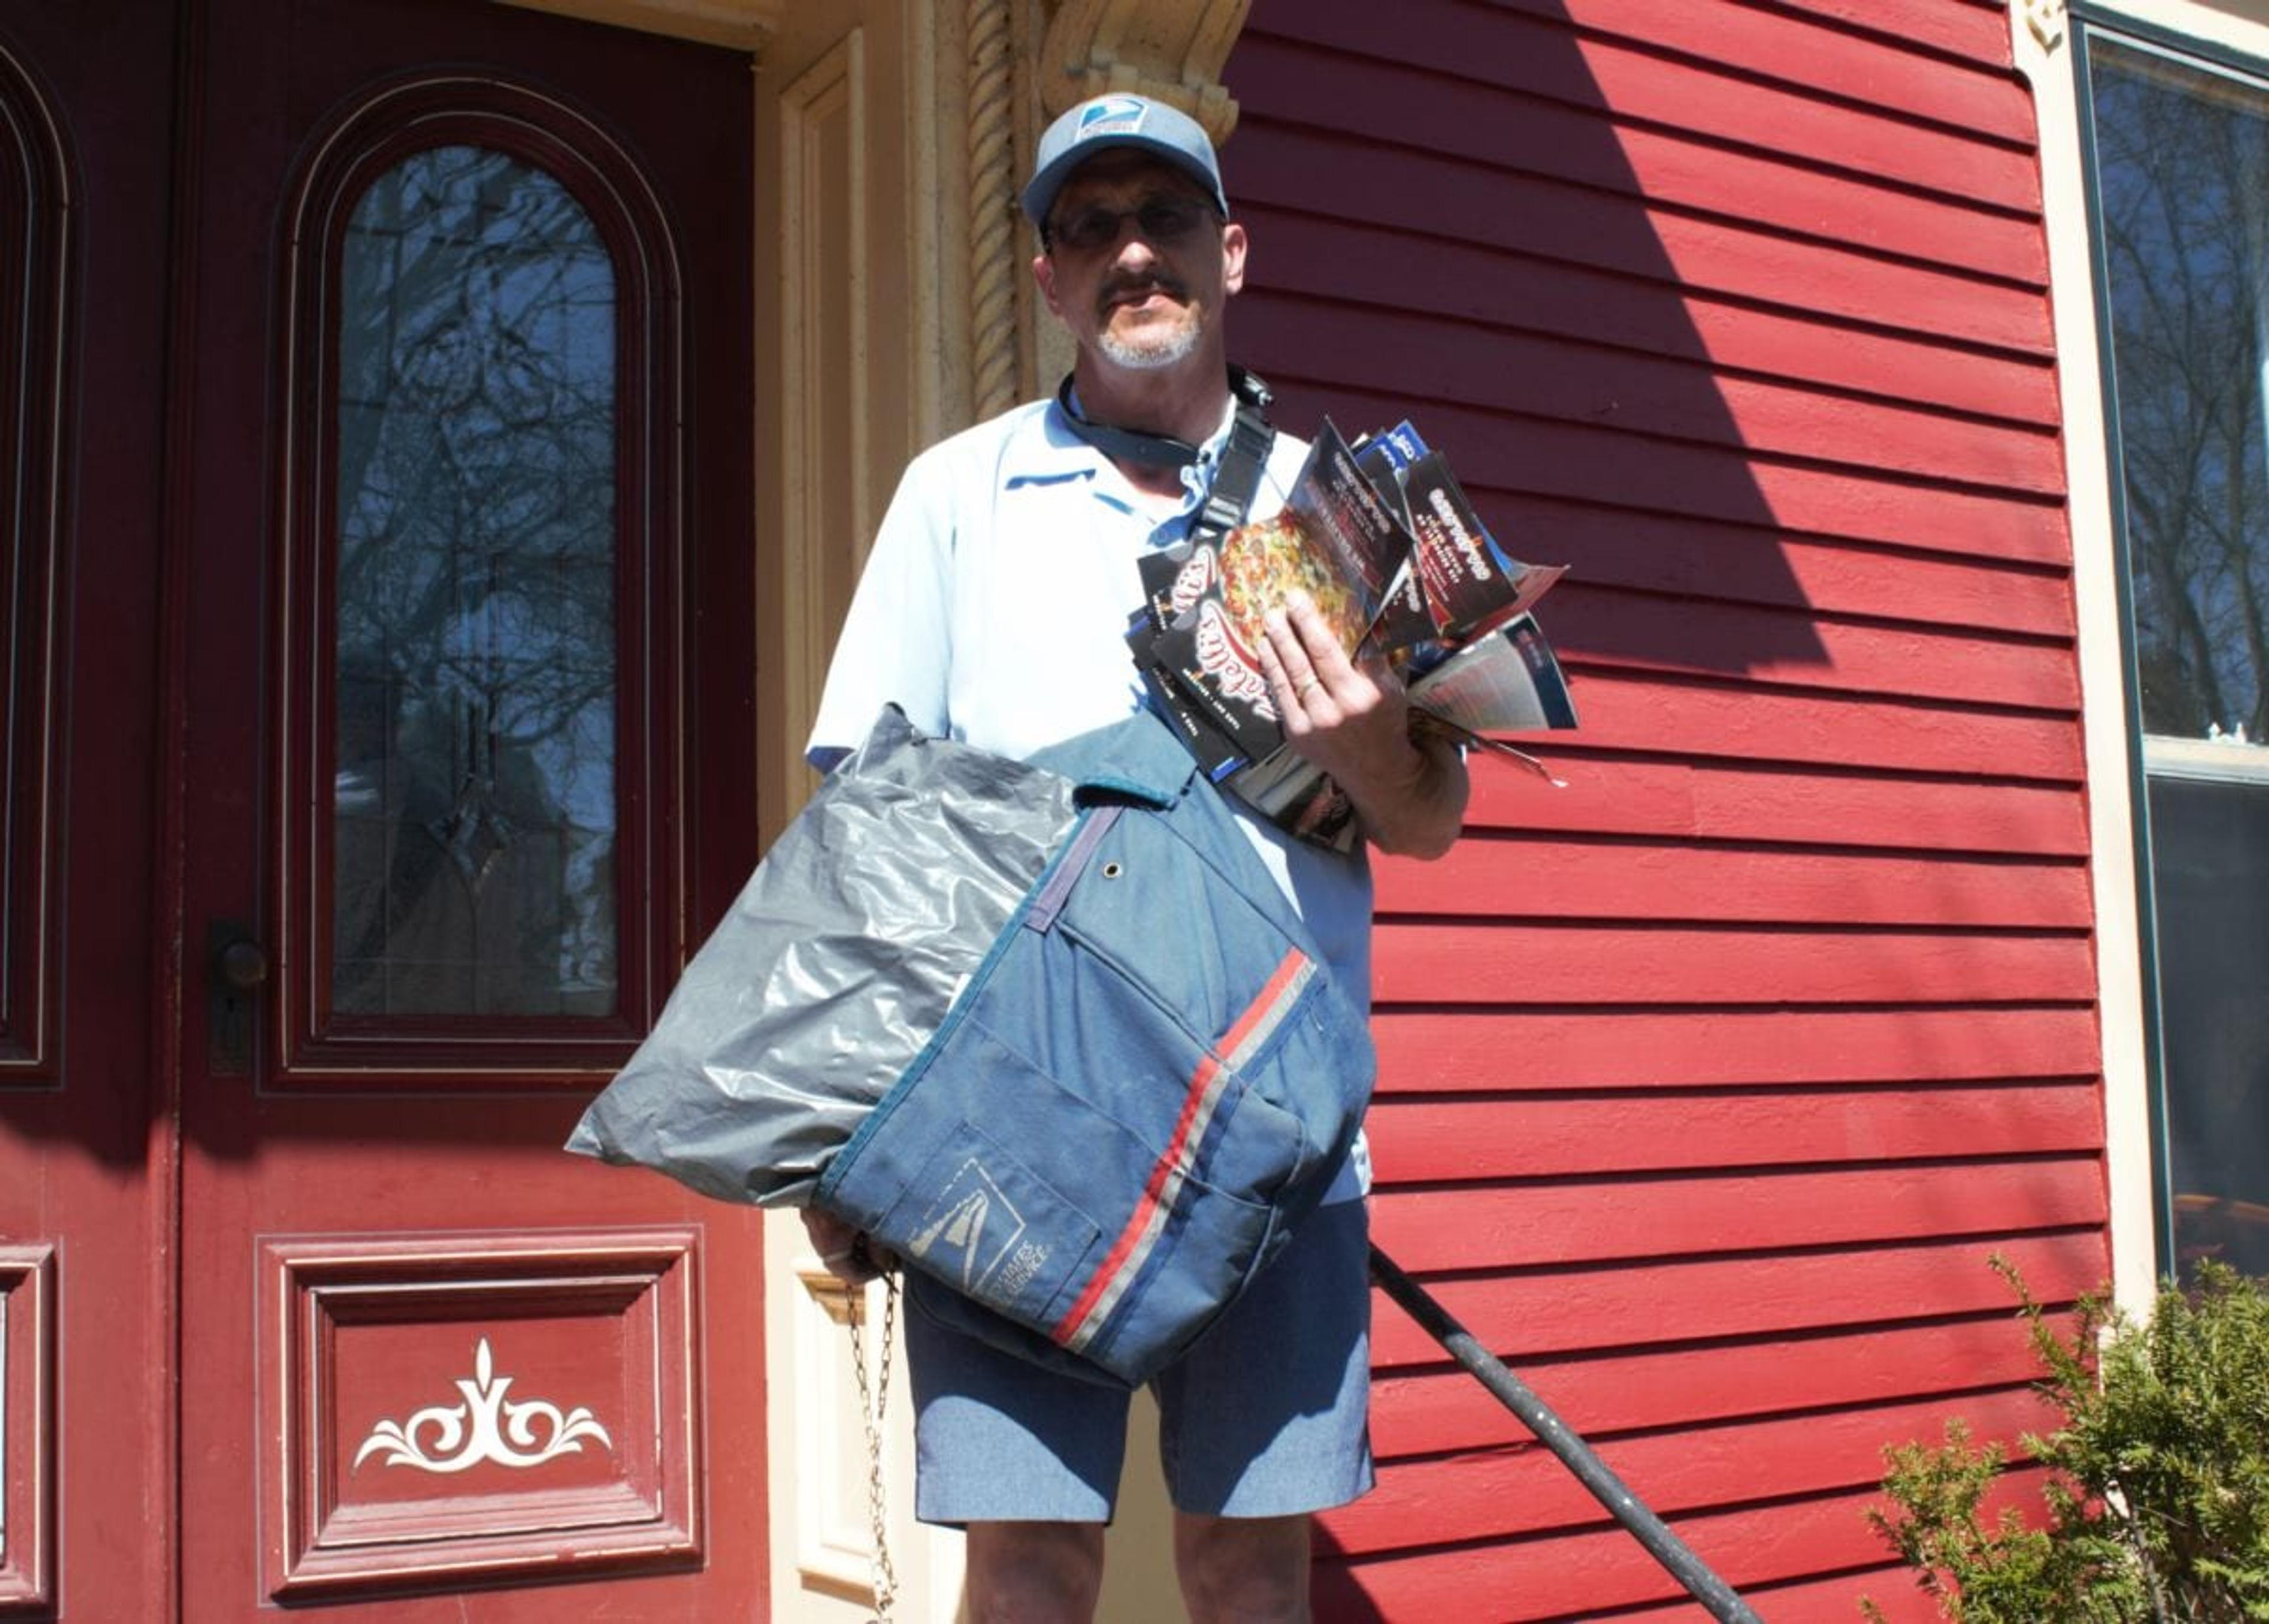 Ron Kammers delivering mail on his Heritage Hill route.